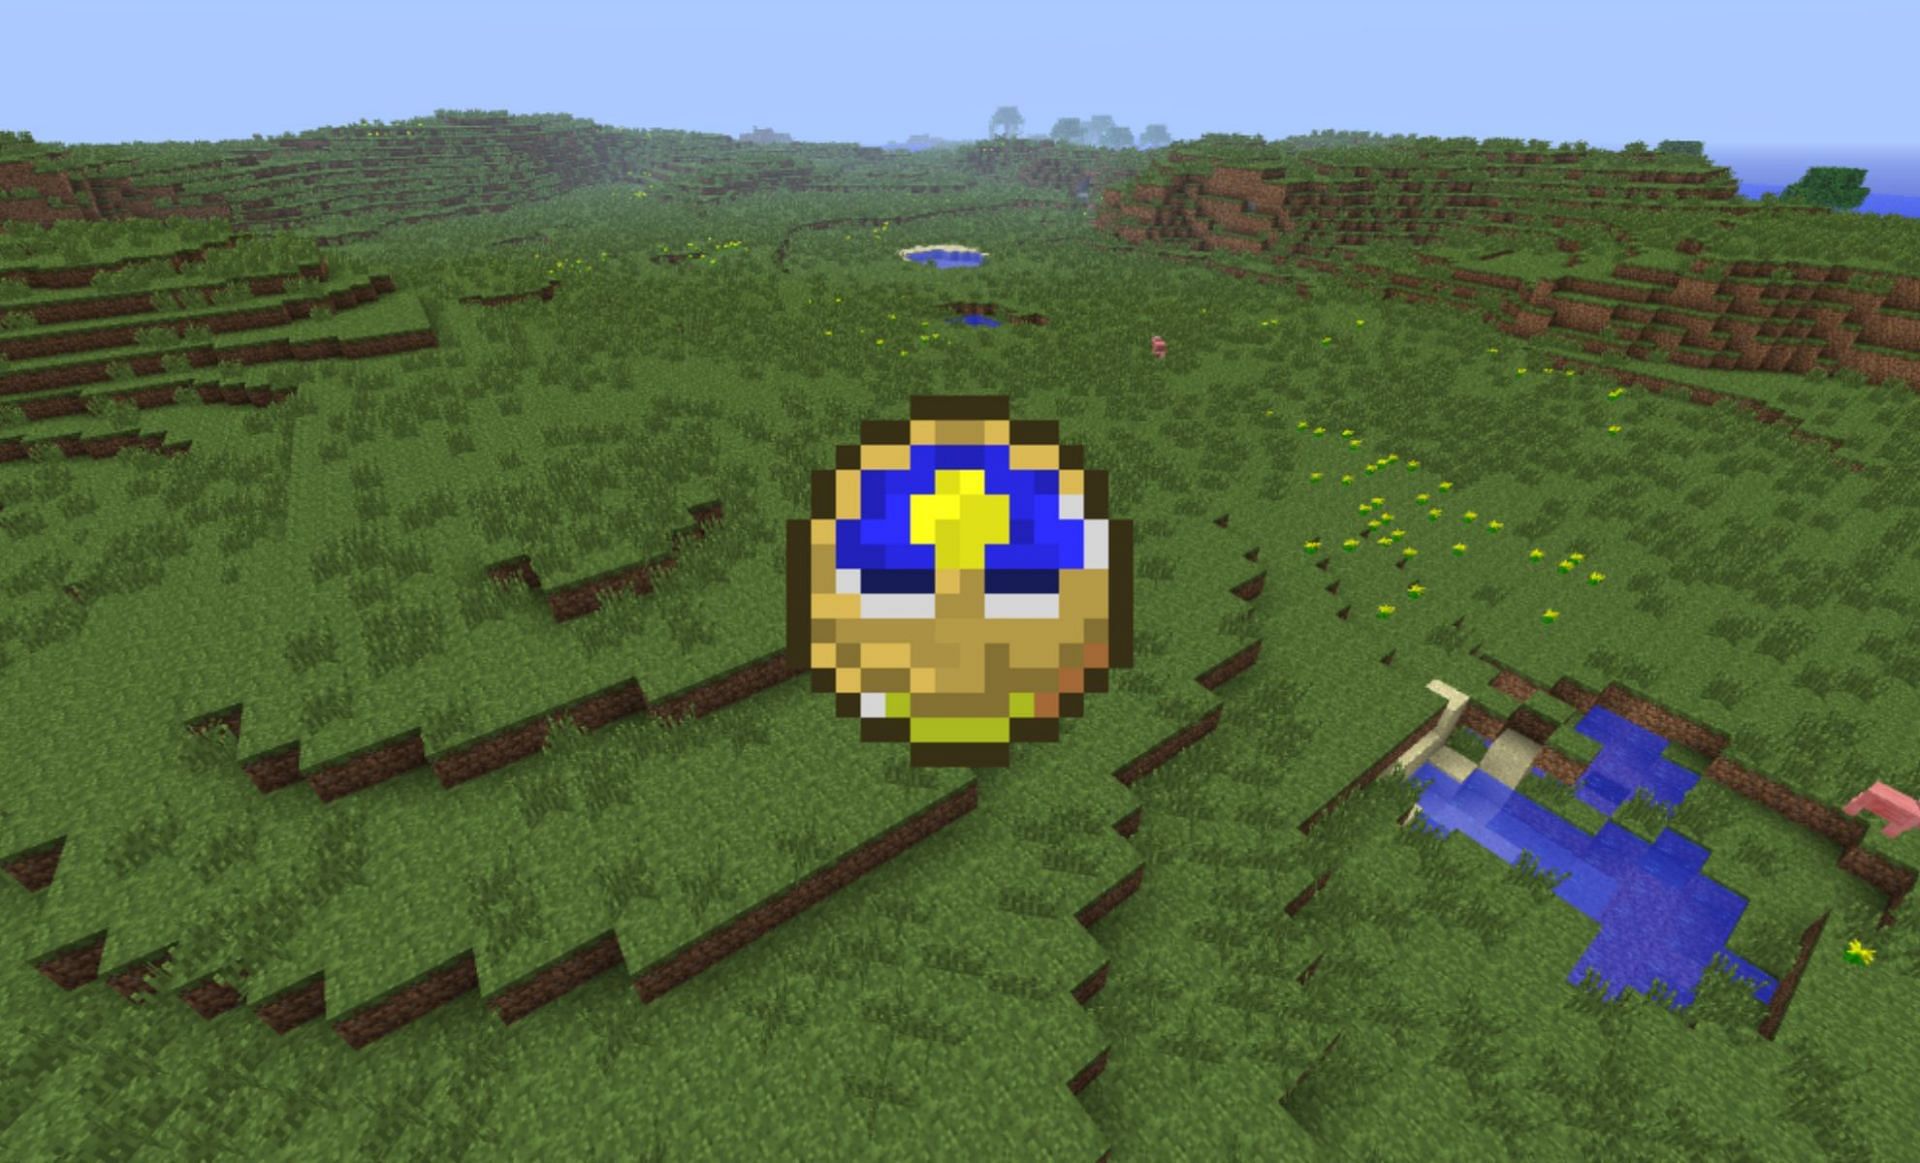 Minecraft's new tick command stops time in-game